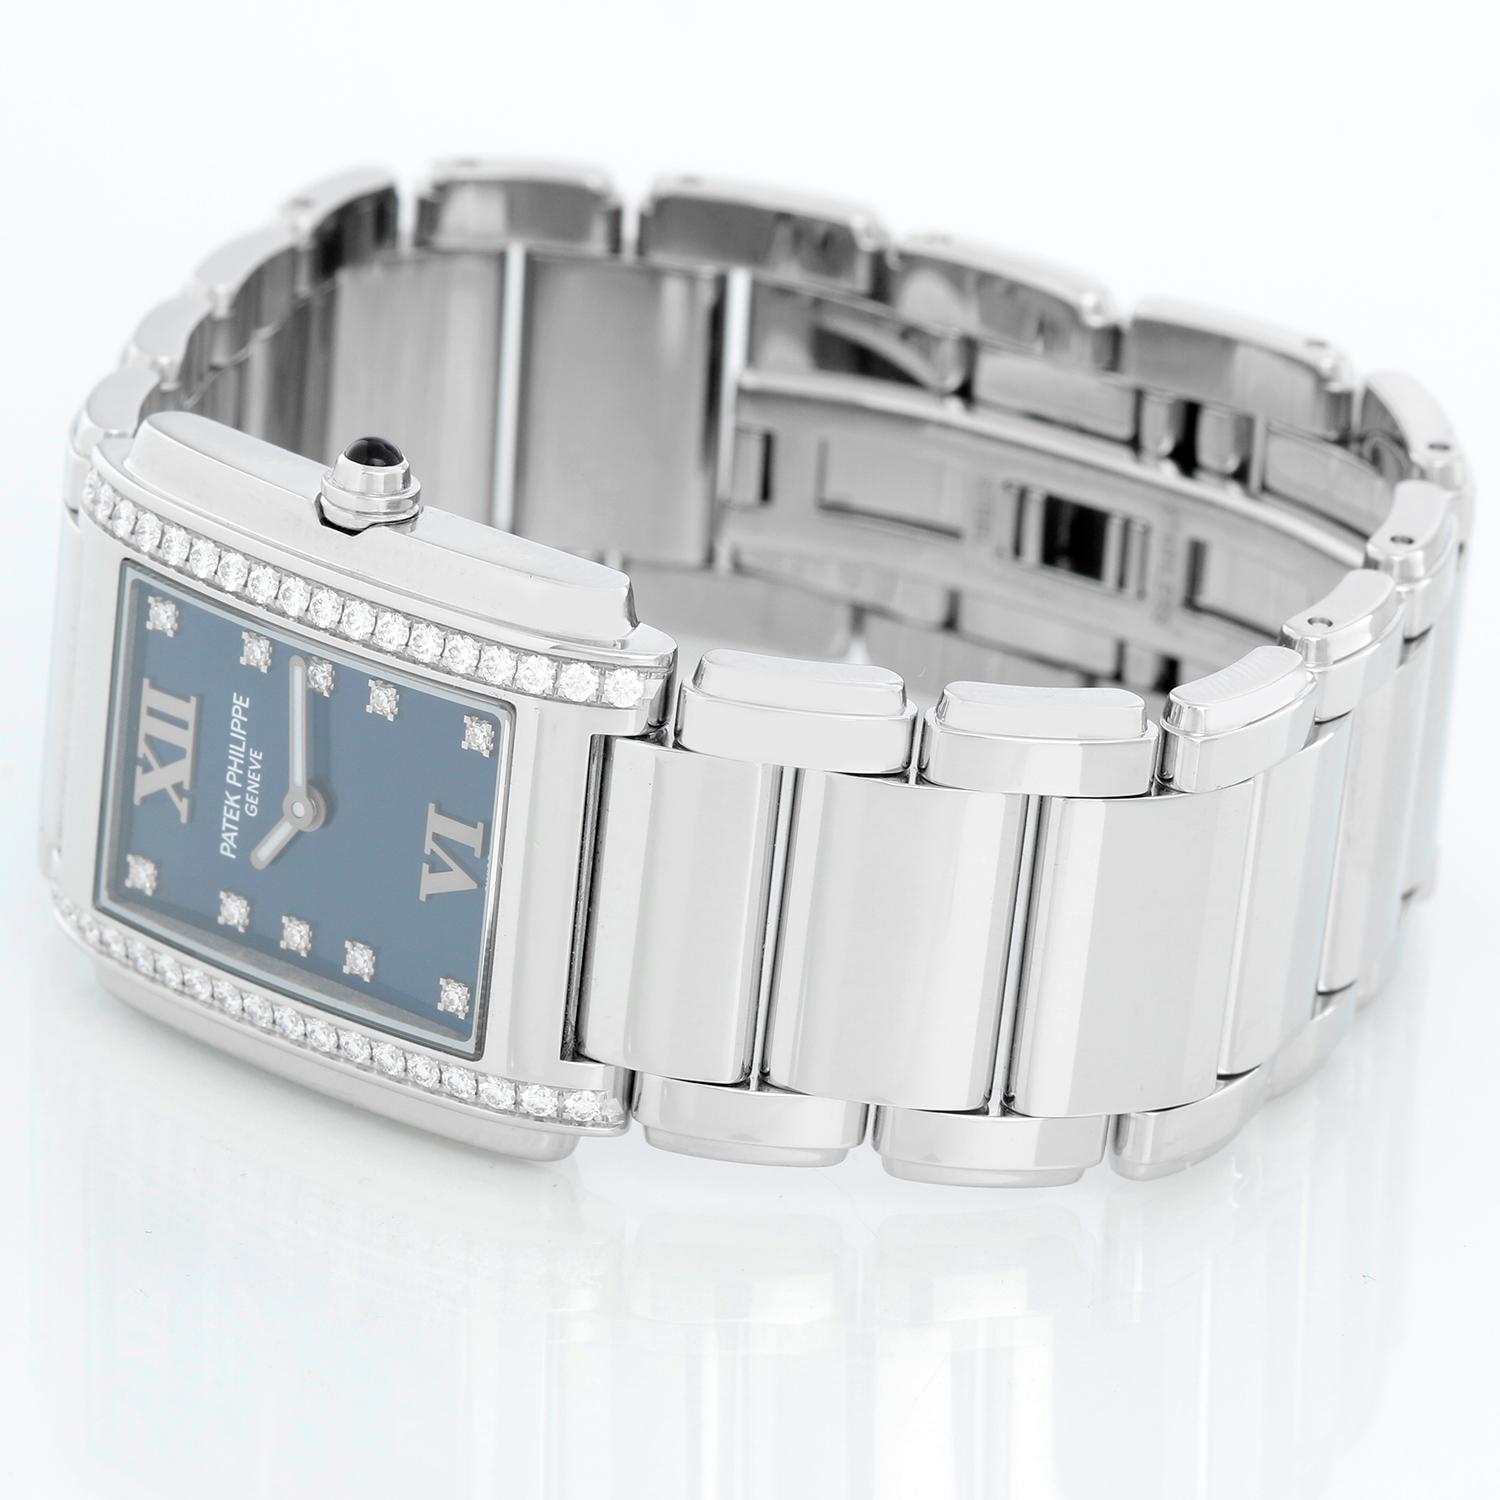 Ladies Patek Philippe Twenty-4 Watch Stainless Steel Blue Dial Watch 4910/10A - Quartz. Stainless steel case with diamond bezel (25mm x 30mm). Blue dial with diamond markers and Roman numerals at 12 & 6. Stainless steel Patek Philippe link bracelet;